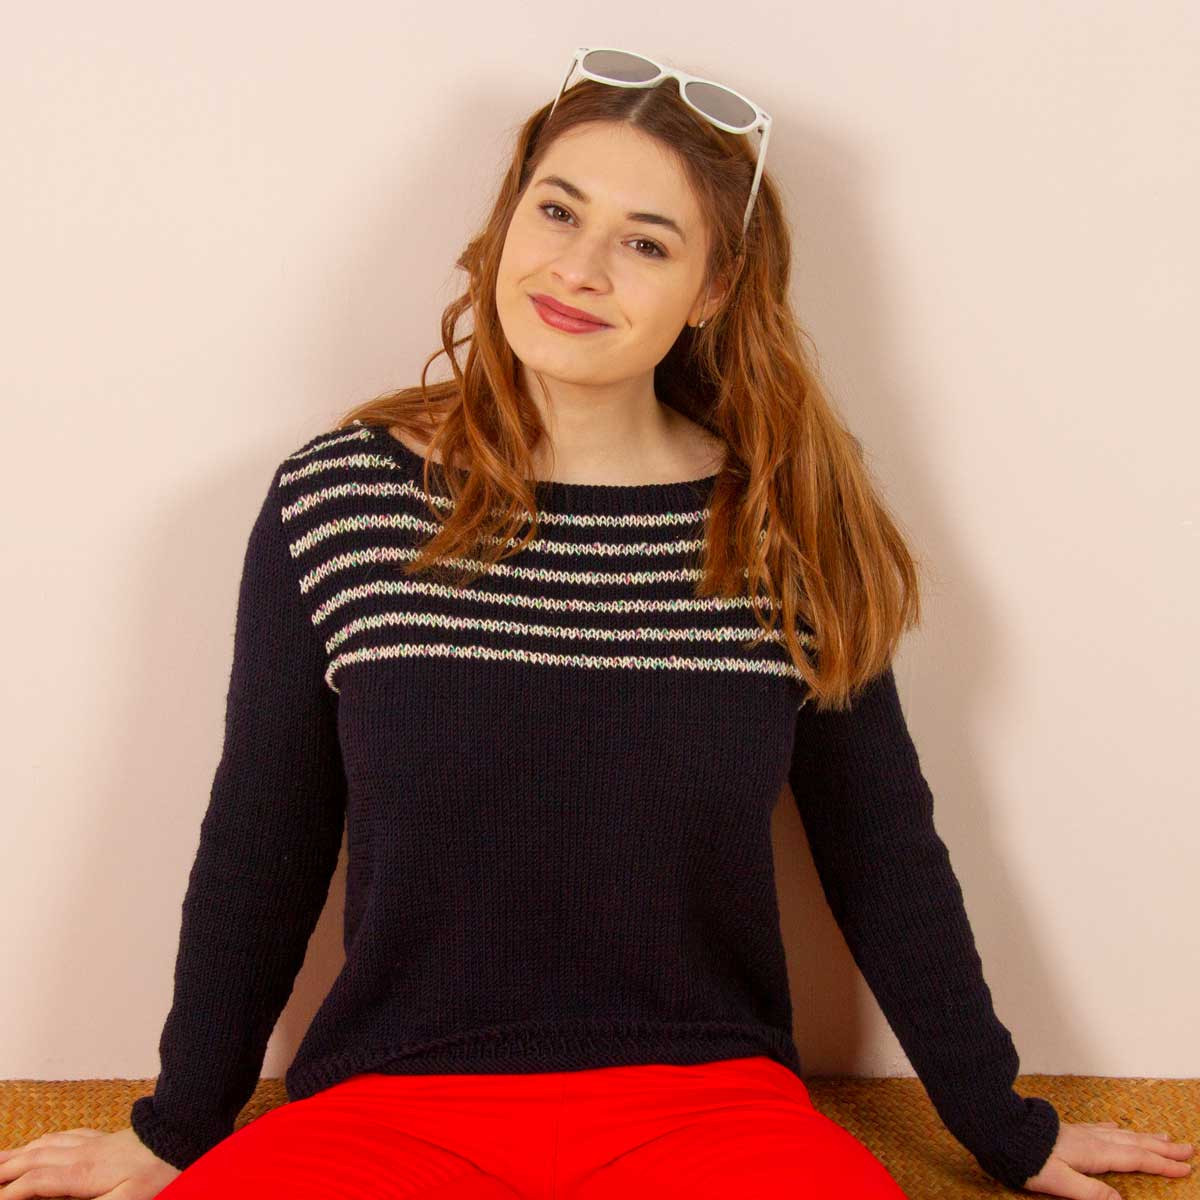 Natice ready-to-knit sweater